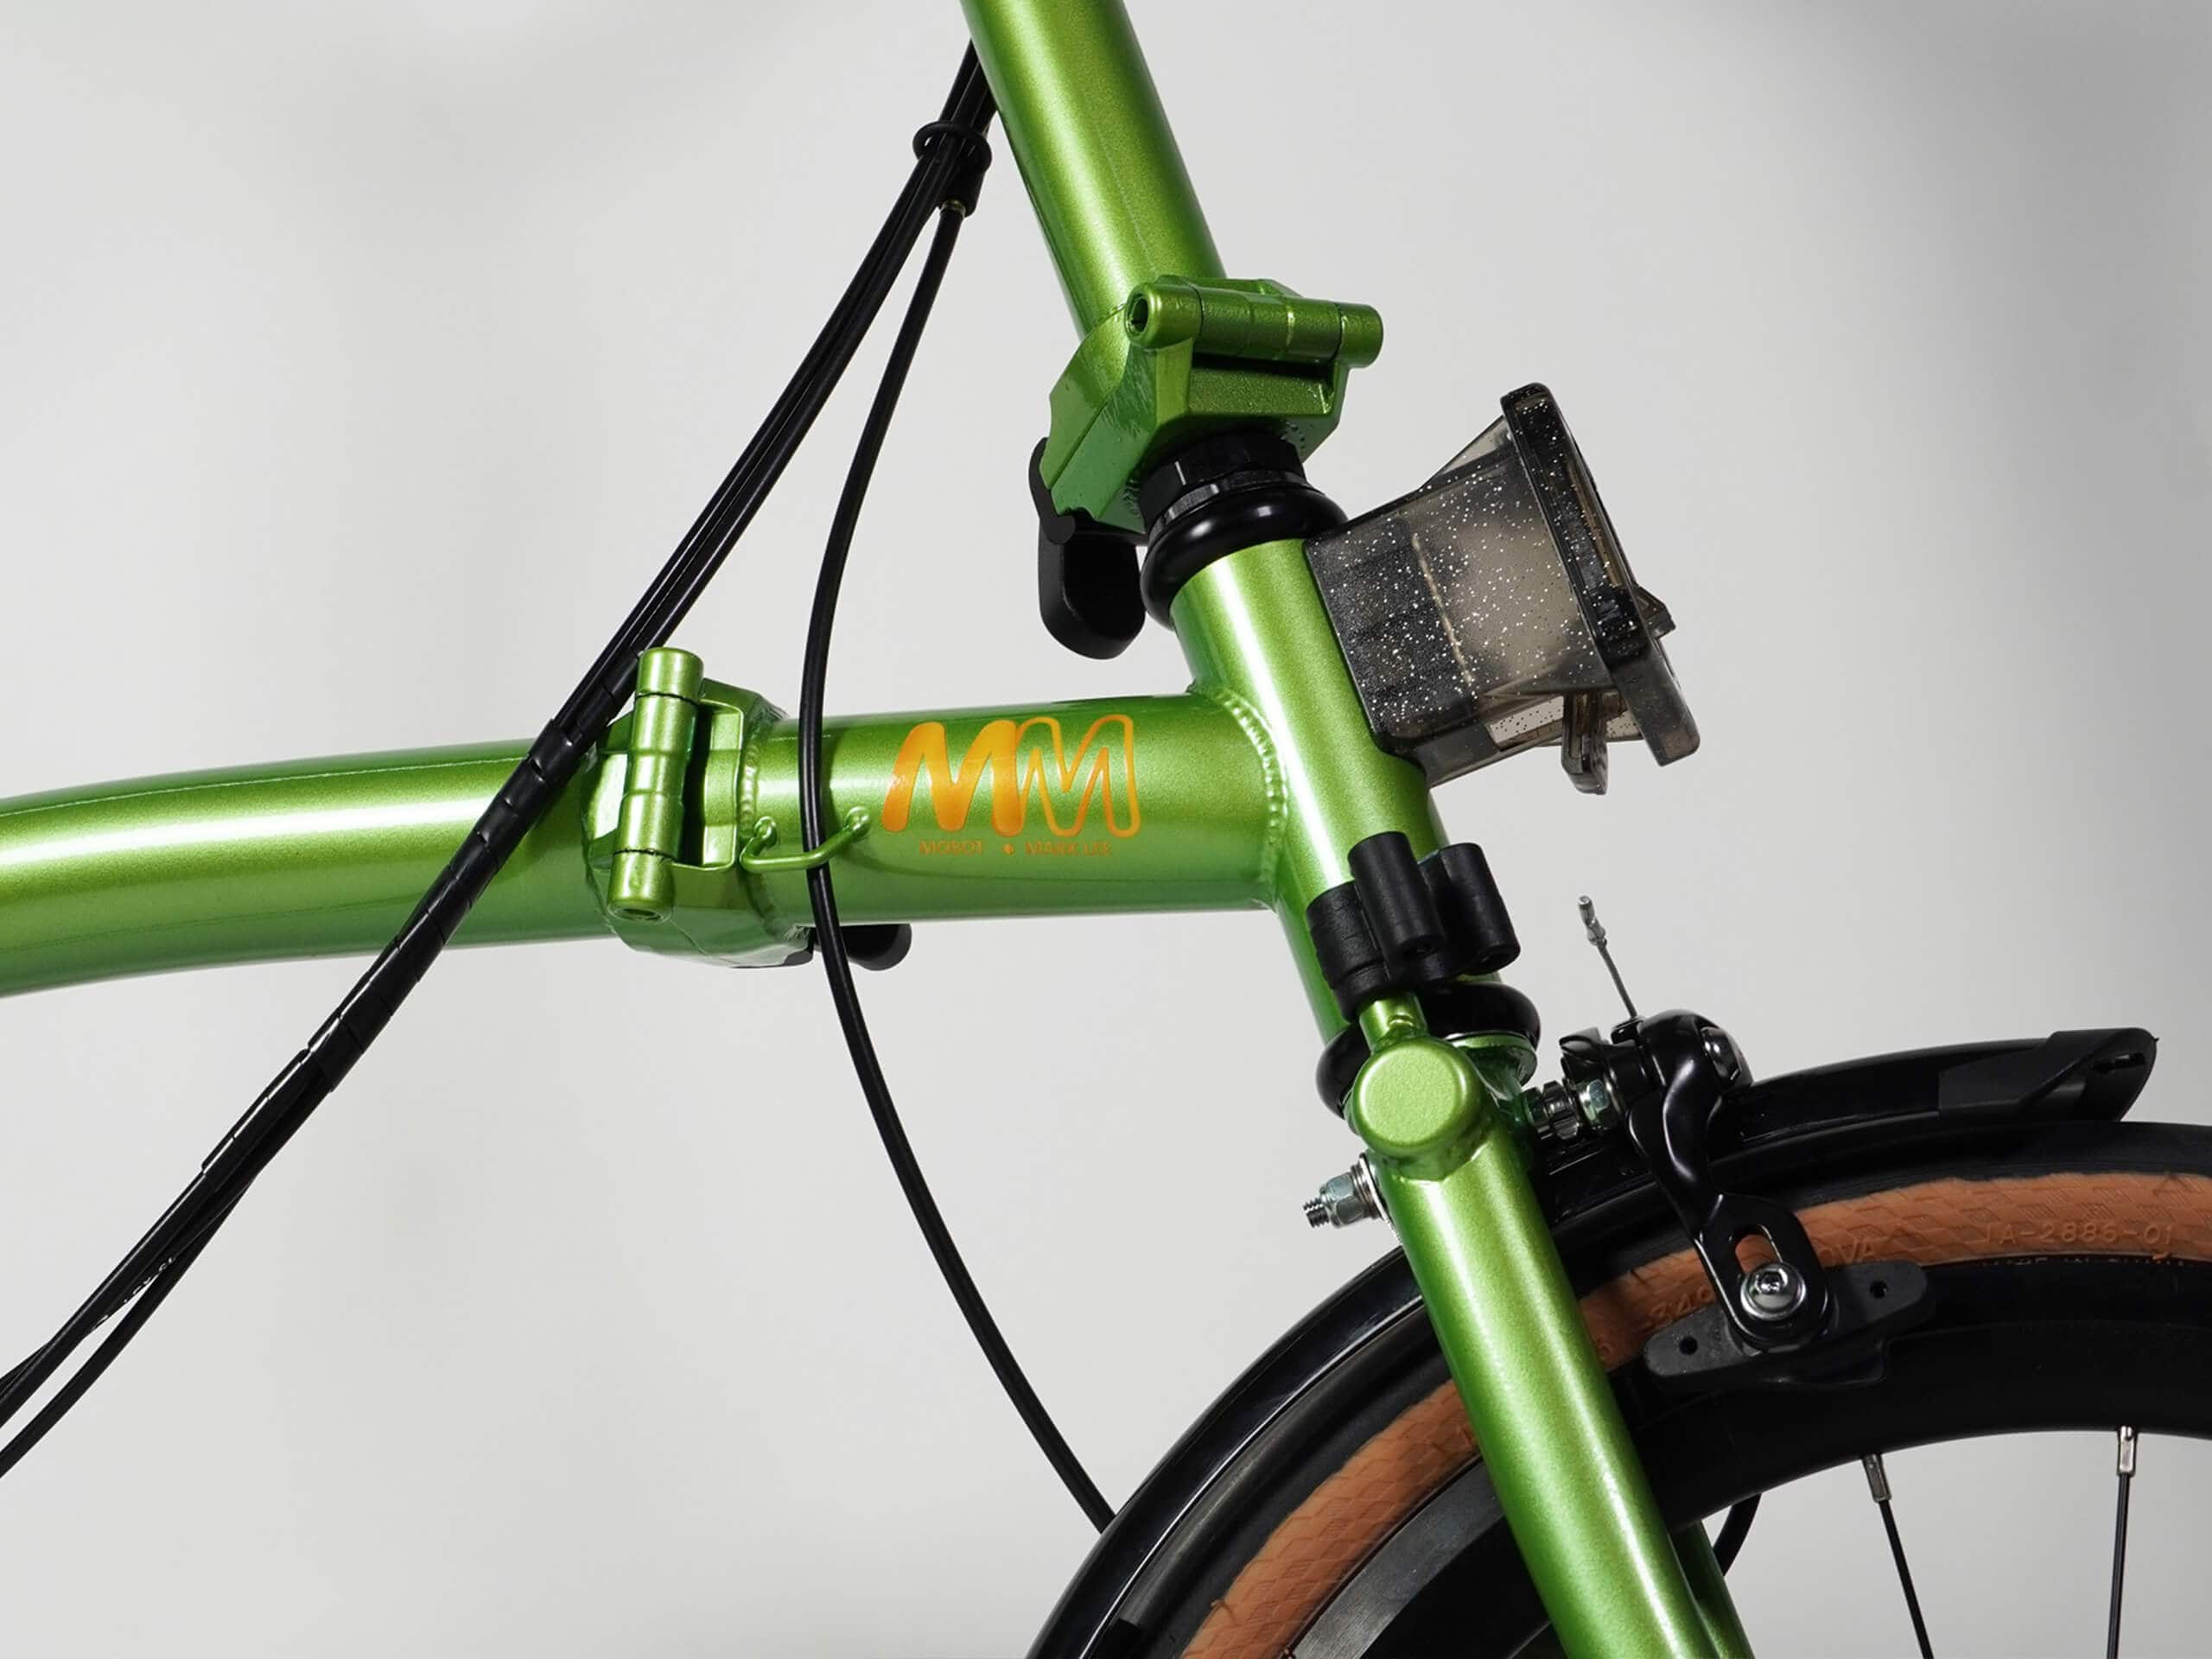 Mobot x Mark Lee ROYALE OLIVE GREEN foldable bicycle - Press Release: Mark Lee launches nature inspired limited edition ROYALE foldable bicycle series in collaboration with MOBOT